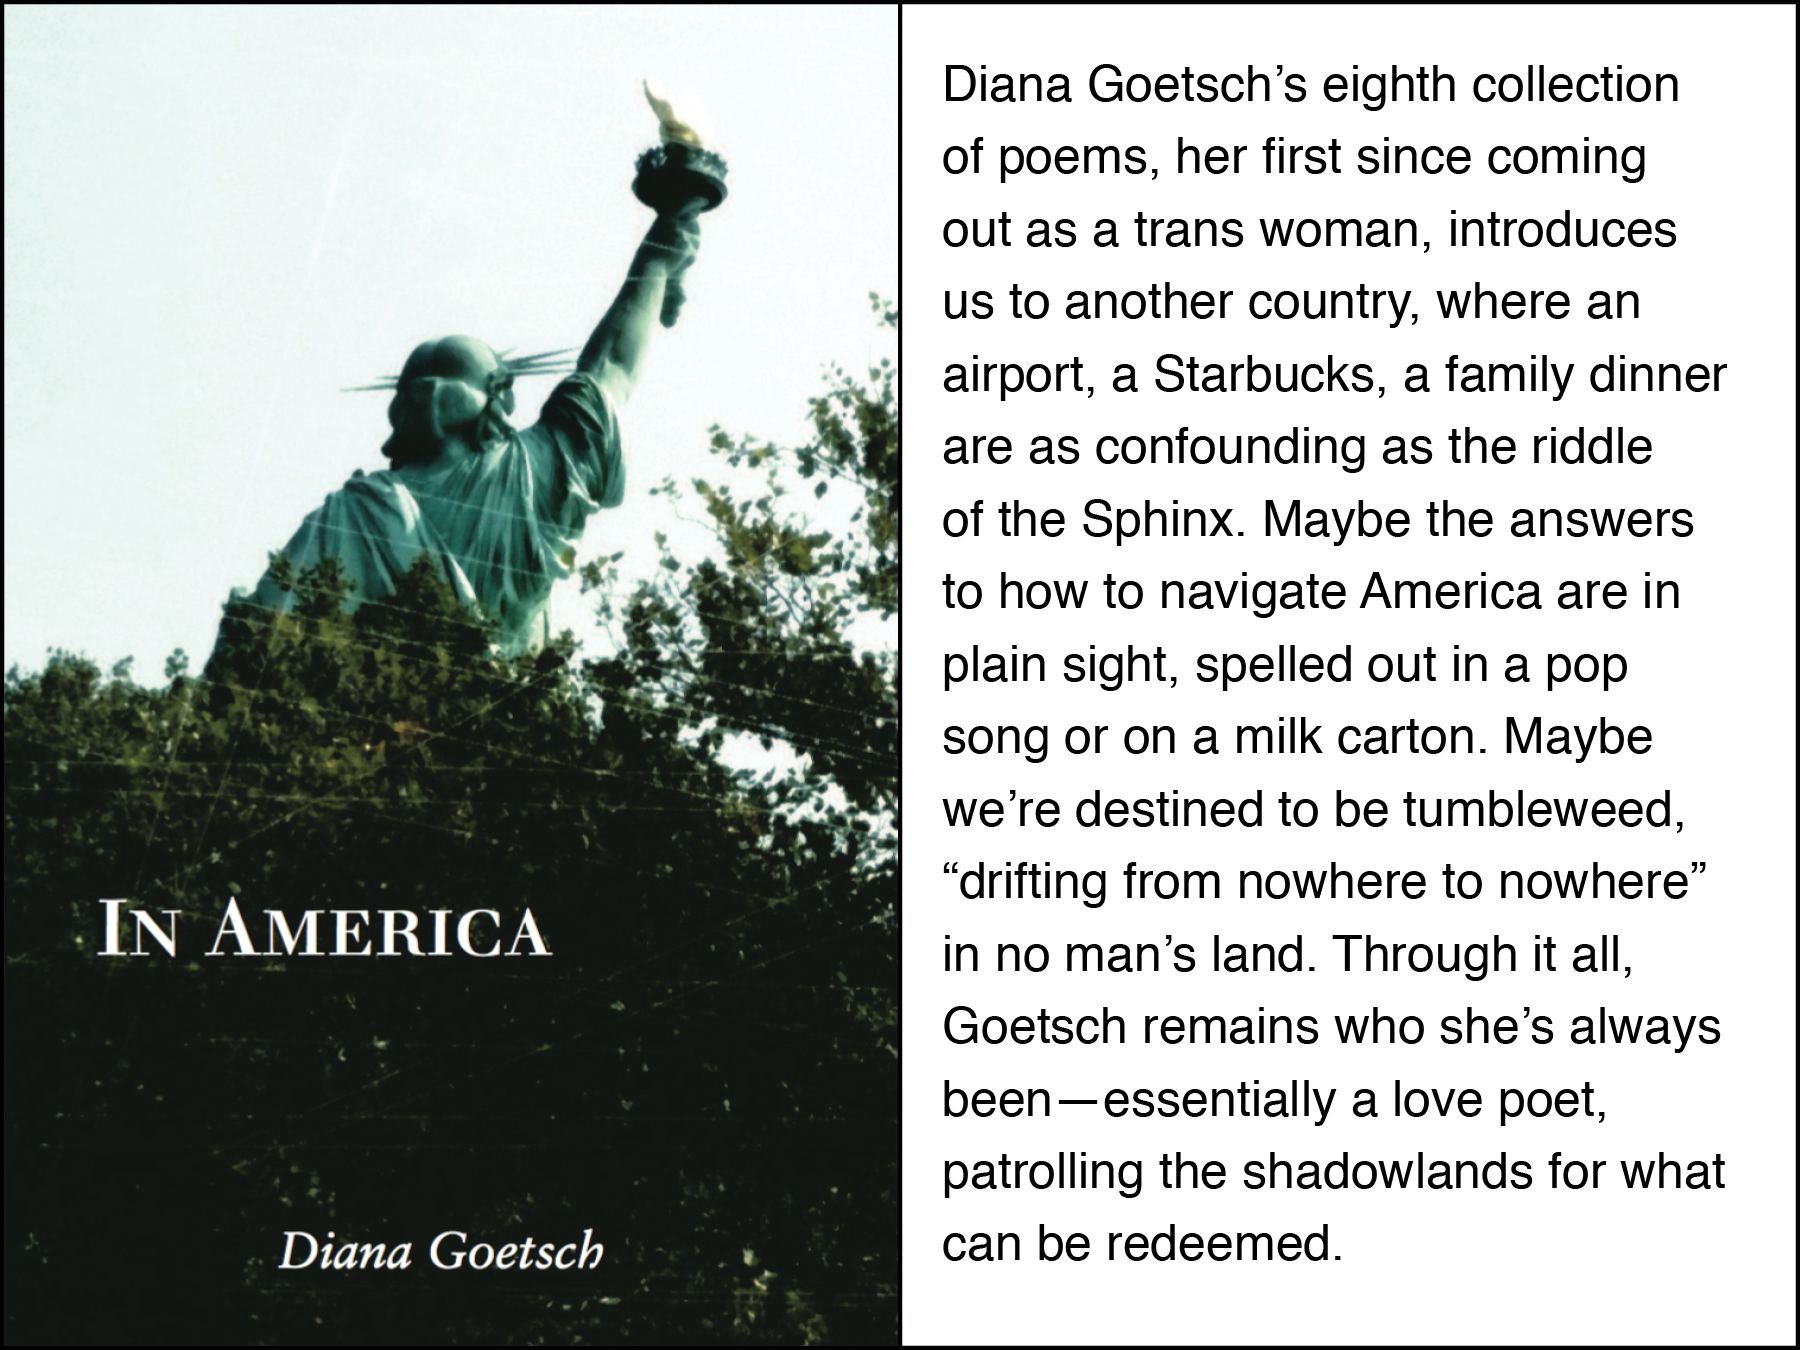 Diana Goetsch’s newest poetry collection now out